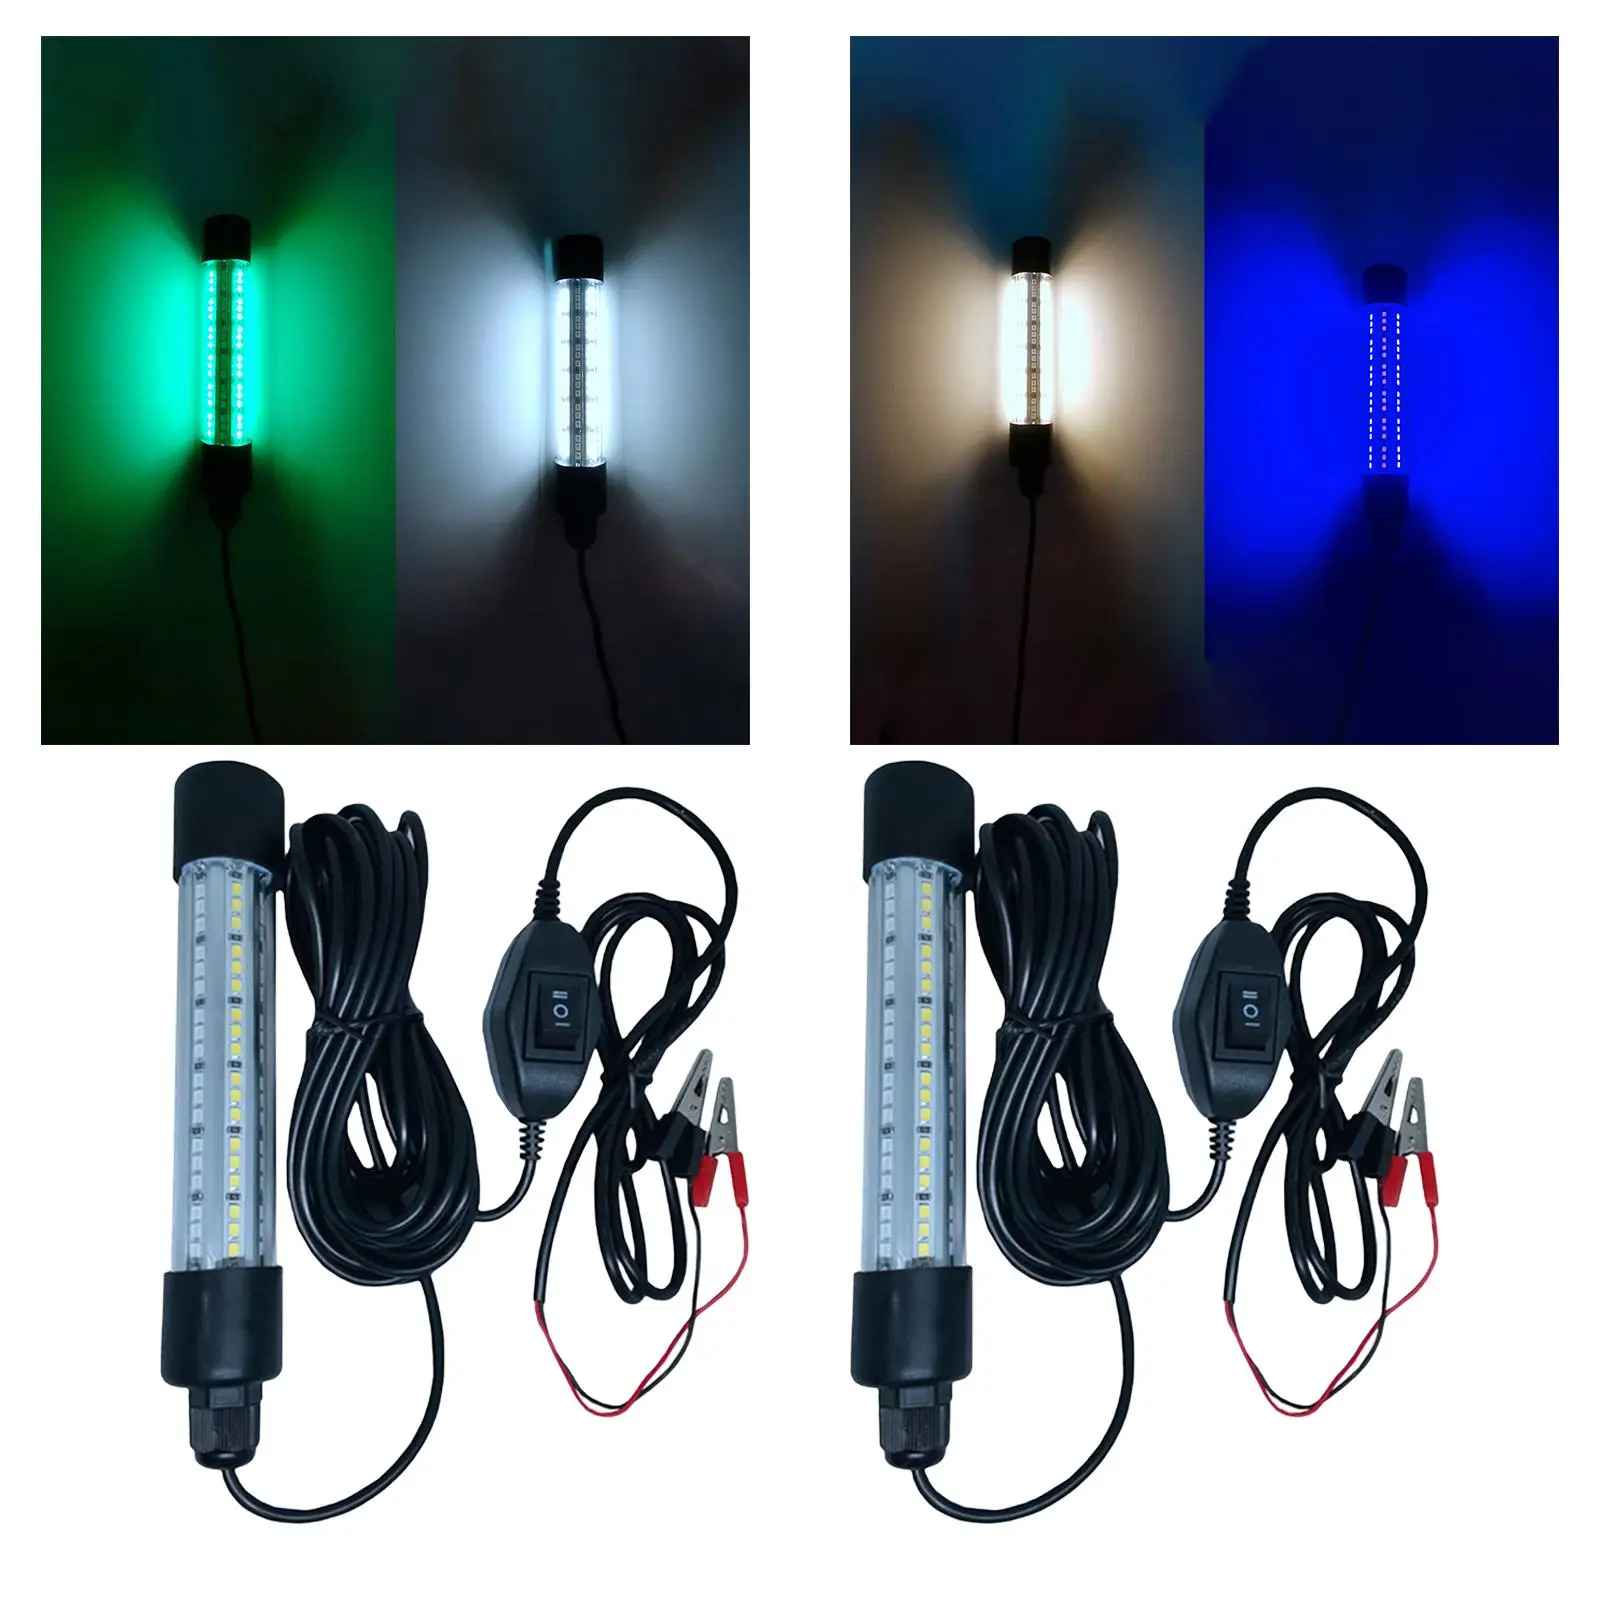 12V 100W LED Submersible Light Fish Fishing Finder Lamp Underwater Crappie Lure with 5M Cord Bait Fish for Boat Dock Saltwater